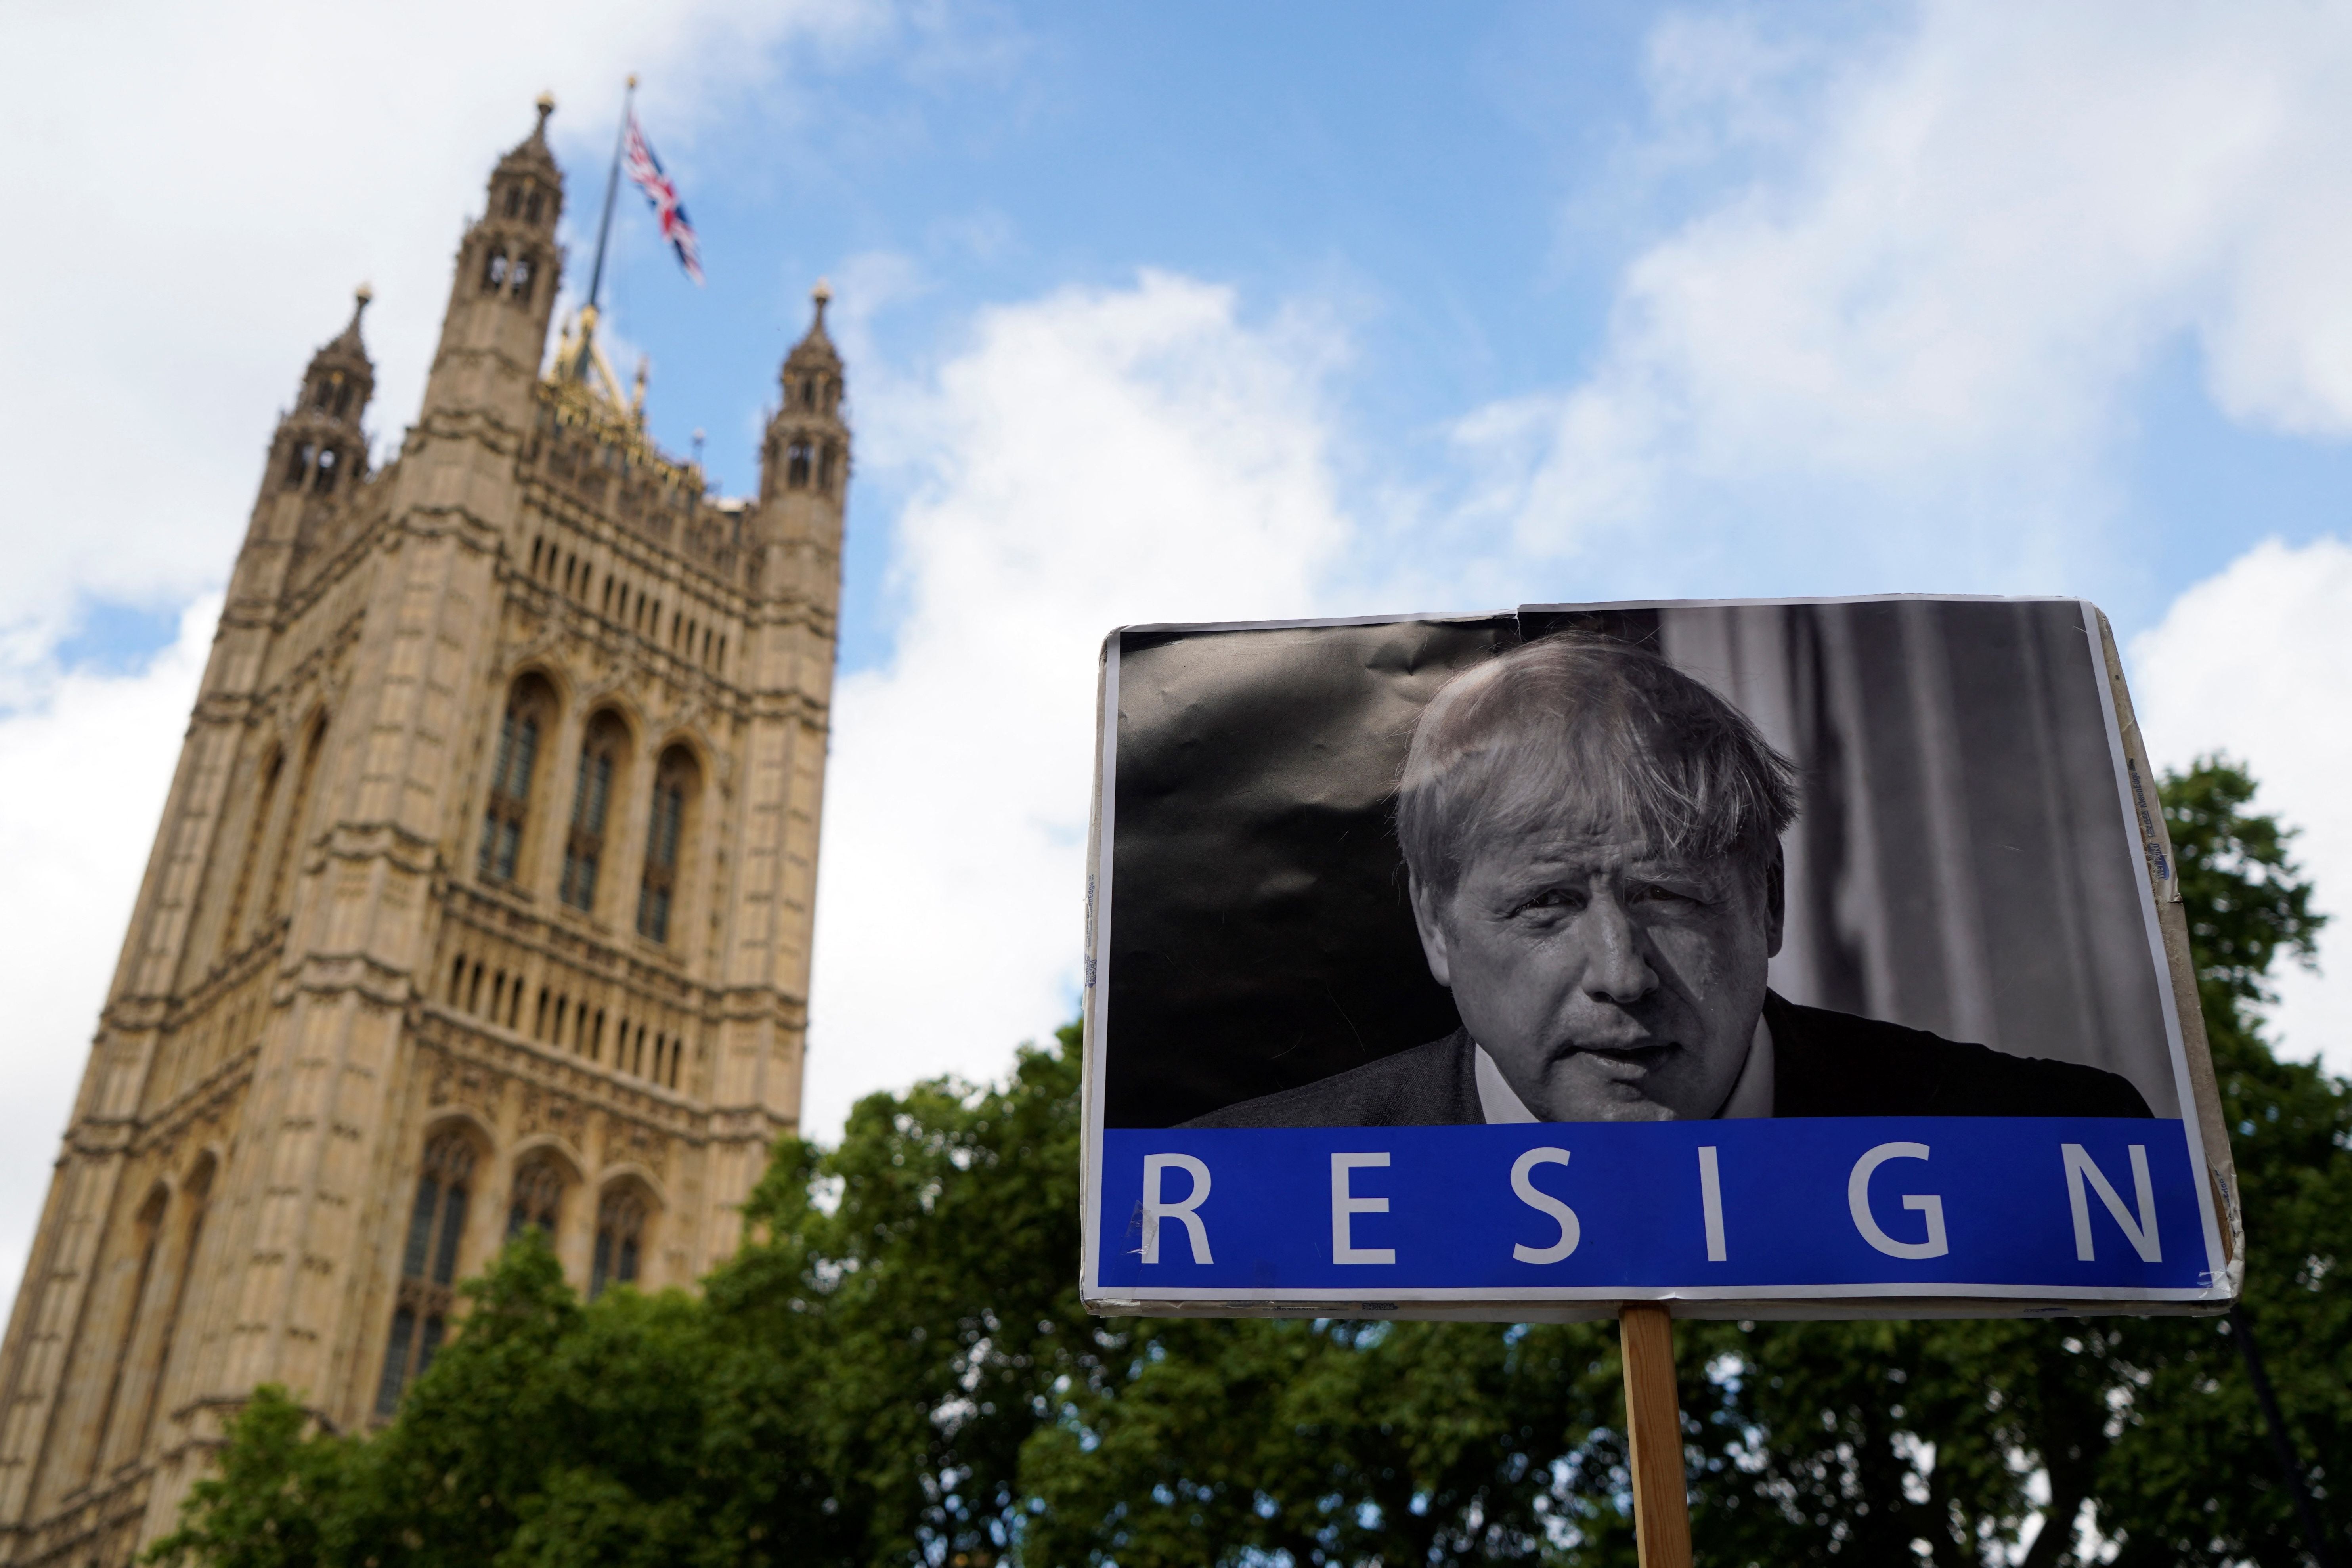 Only now Tory MPs sense the danger of losing their own positions do they reject him